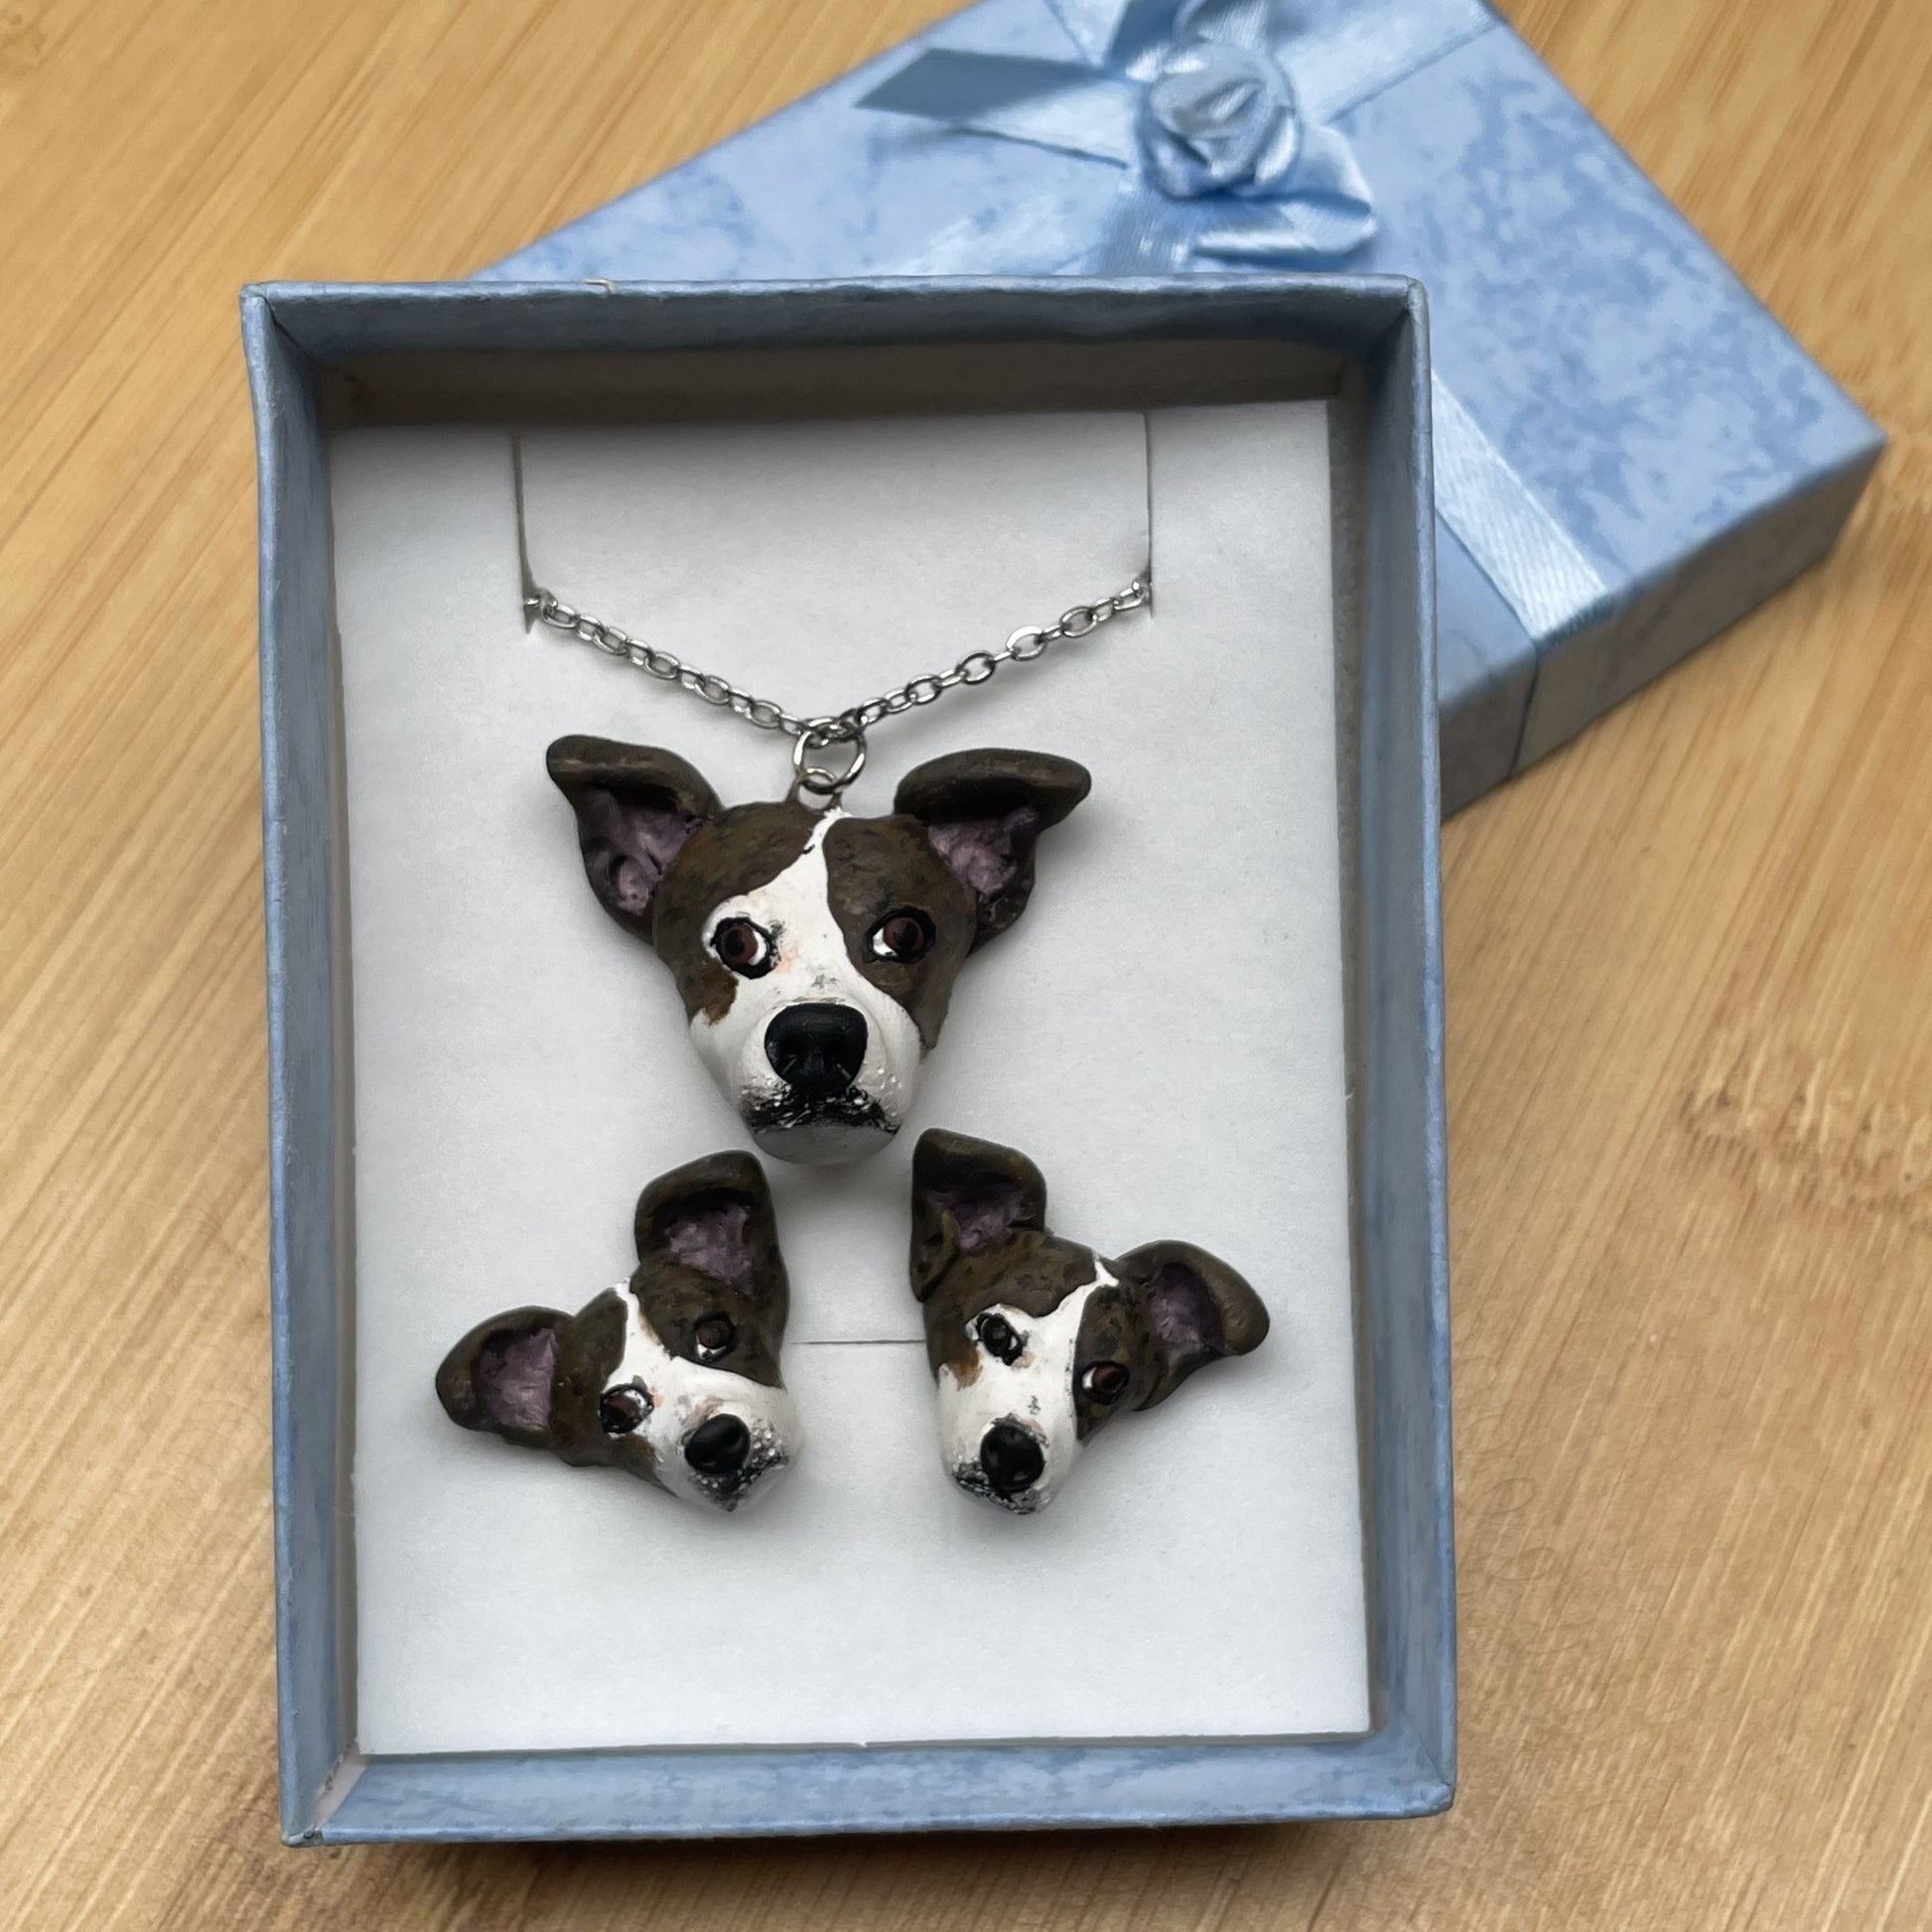 Handmade custom dog necklace pendant on chain and matching stud earrings, in blue display box on timber background.